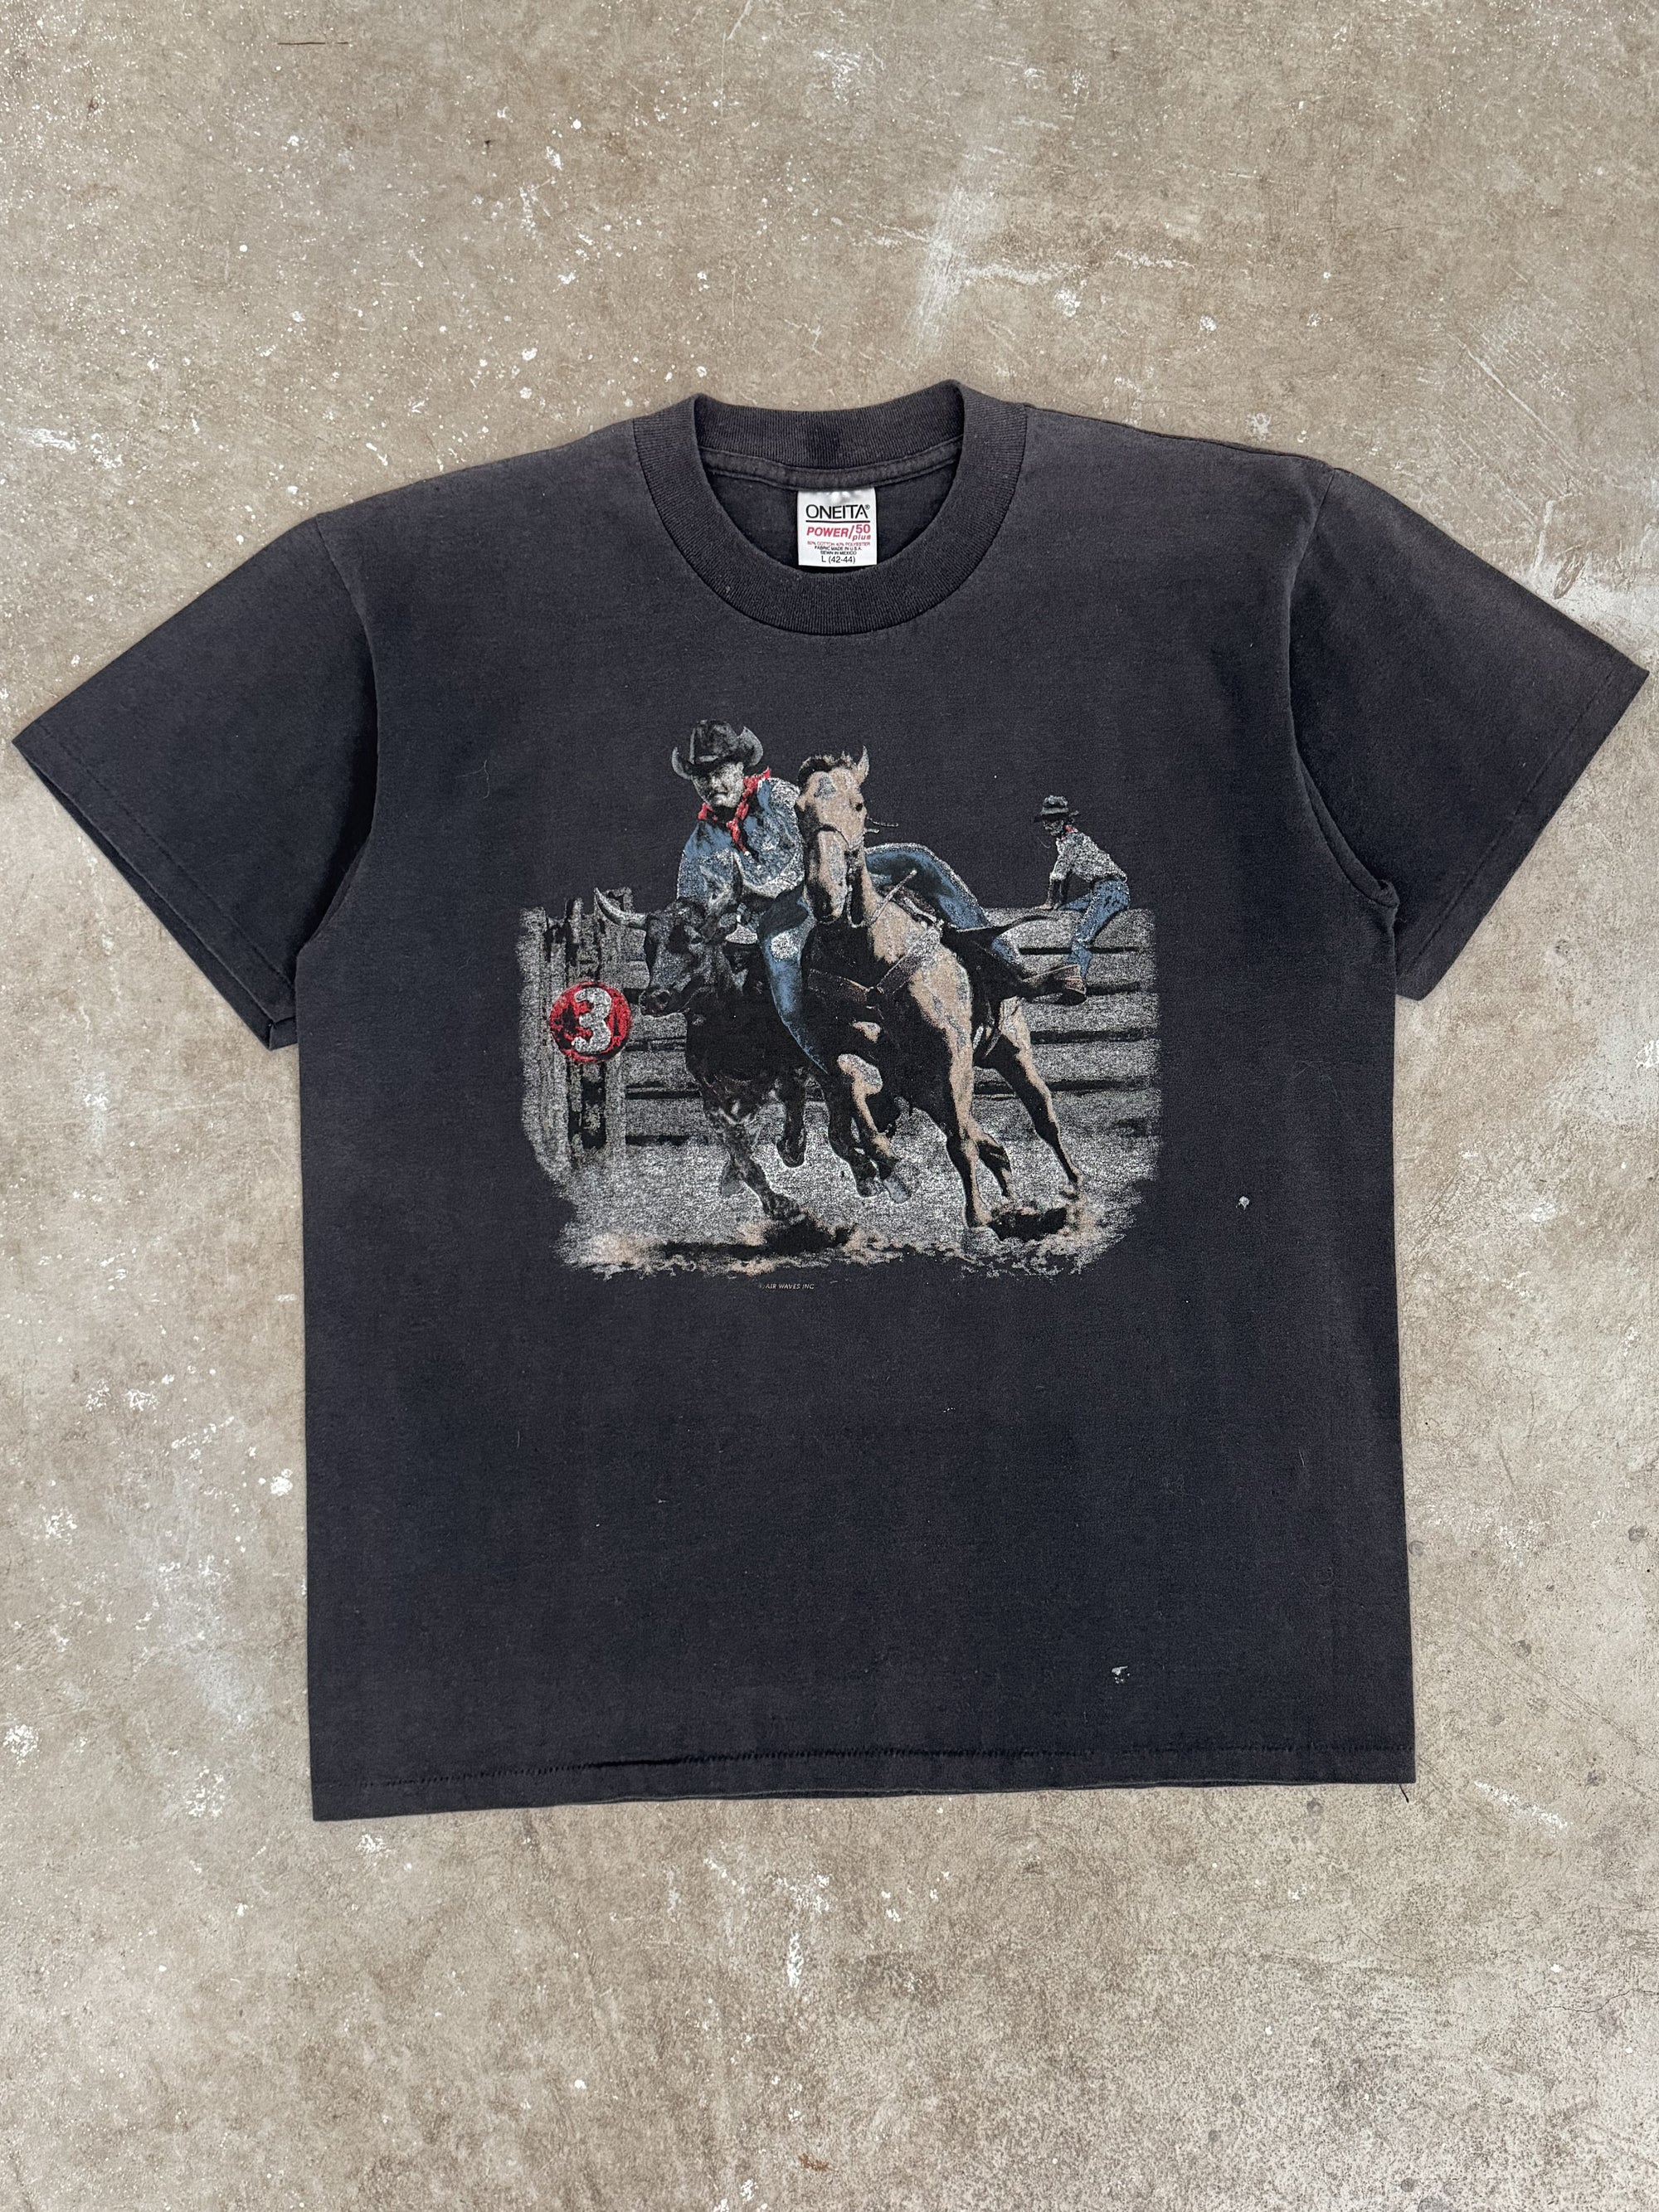 1990s "Rodeo Cowboy" Faded Tee (L)